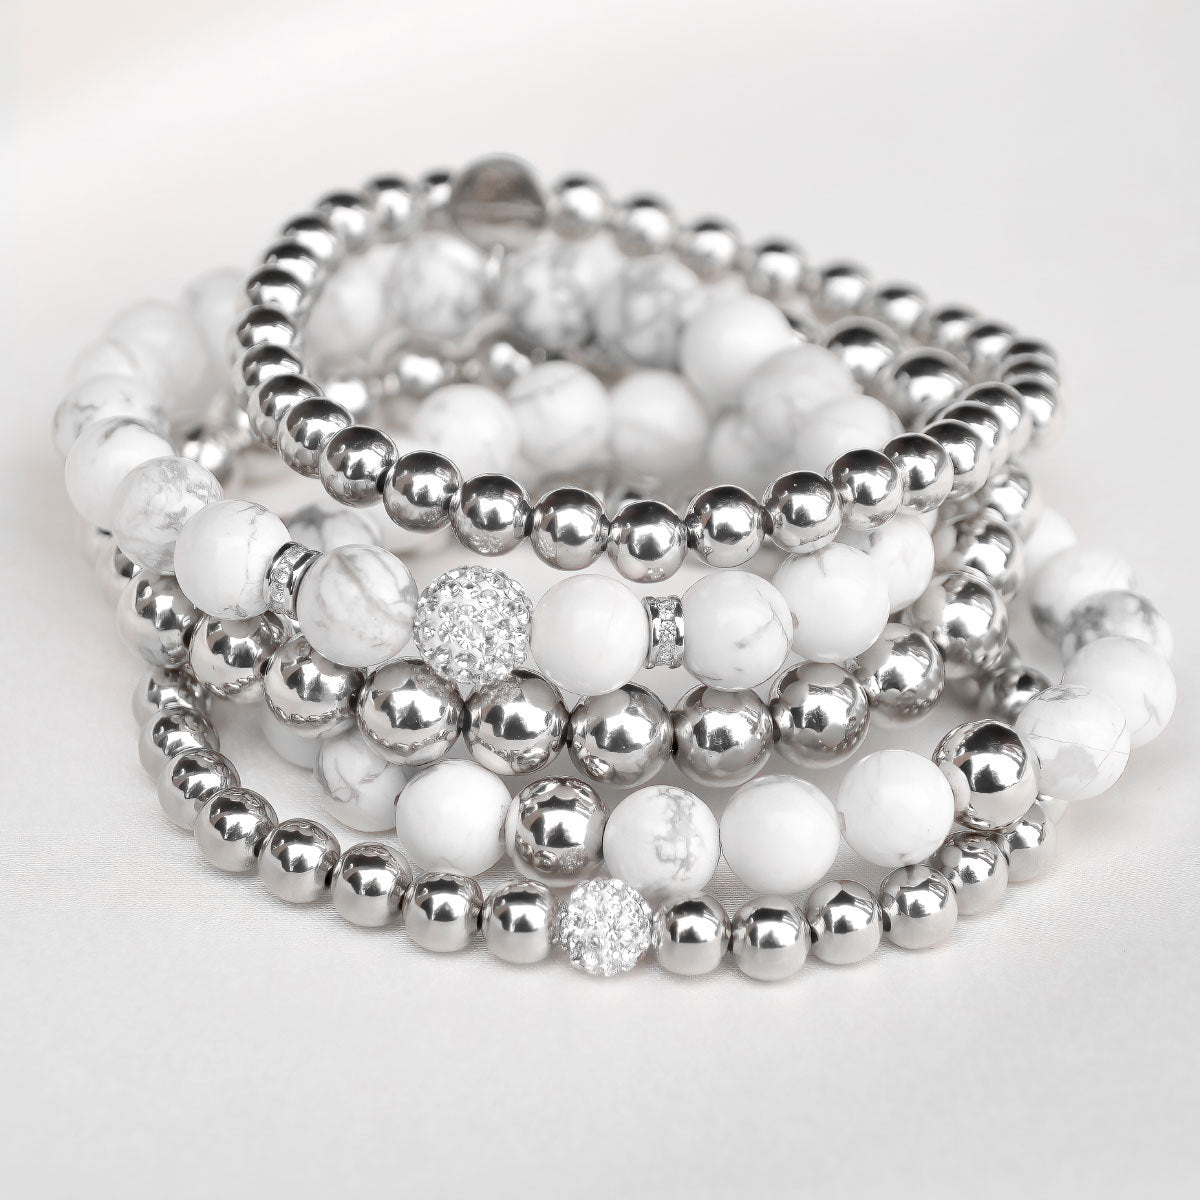 Glitzy Rocks Silver and White Turquoise 5 Pc Bracelet Stack